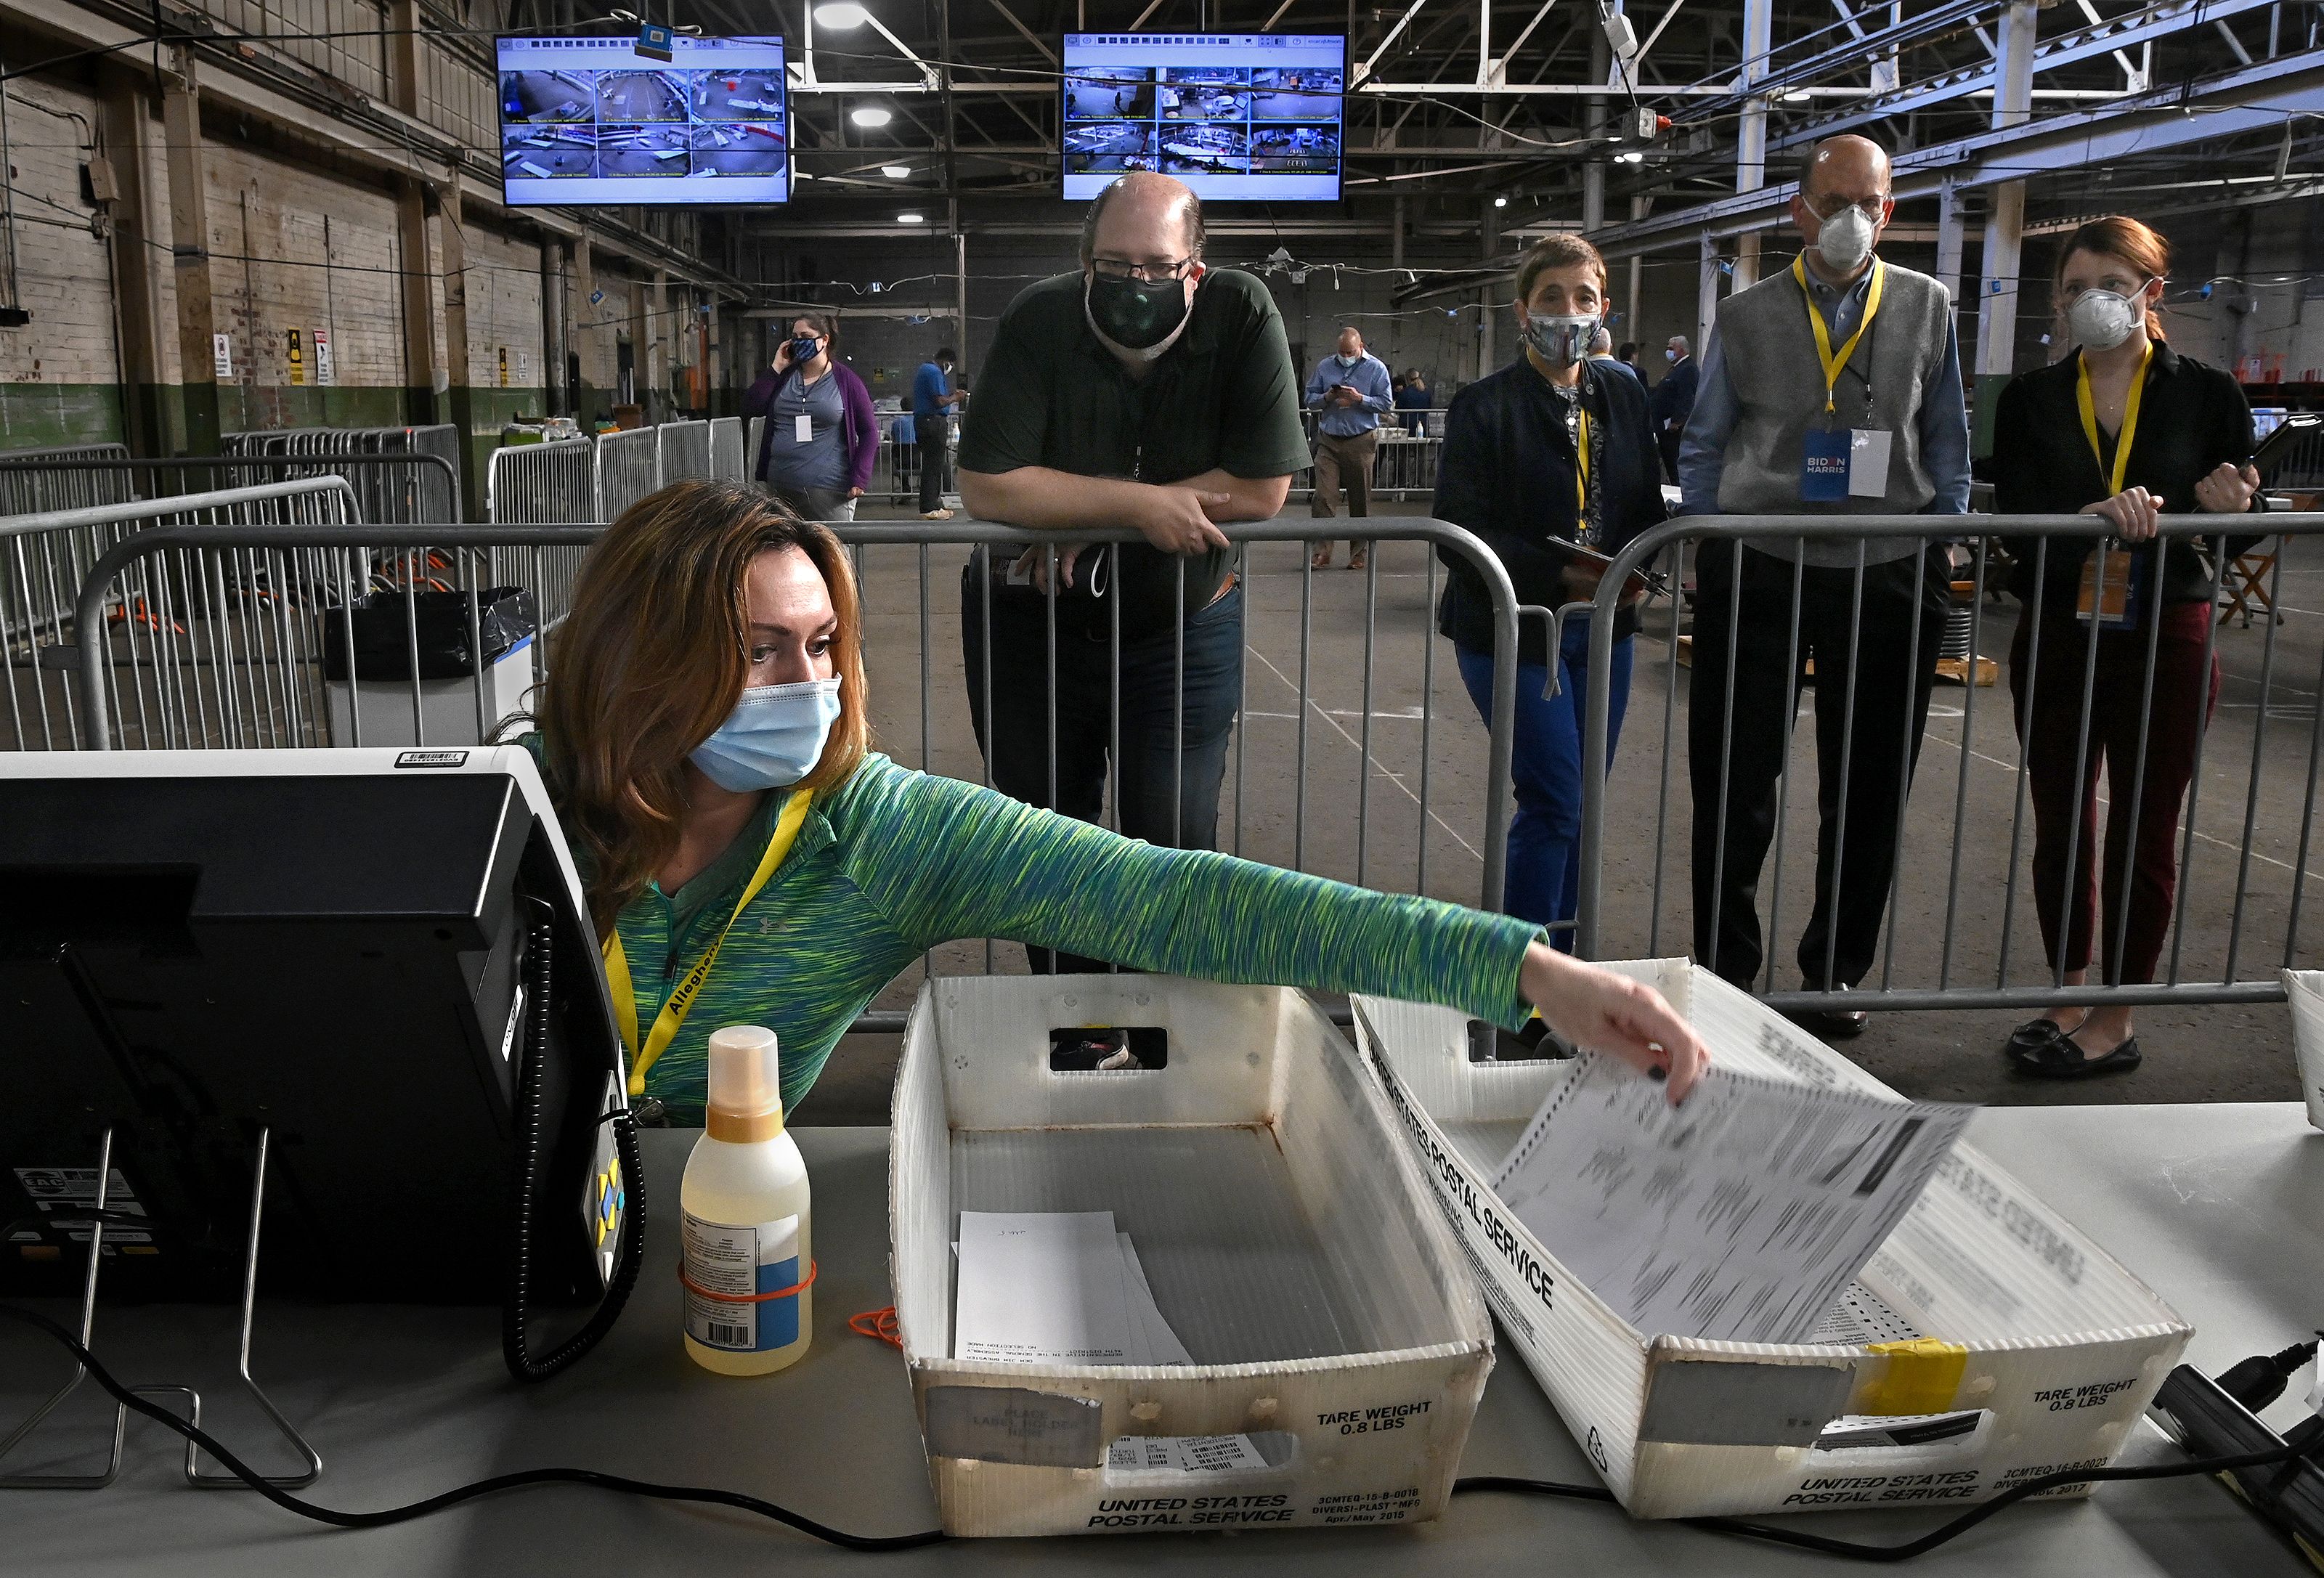 A return board member files a ballot after it was double checked in Pittsburgh, Pennsylvania on Friday. Photo: Michael S. Williamson/The Washington Post via Getty Images